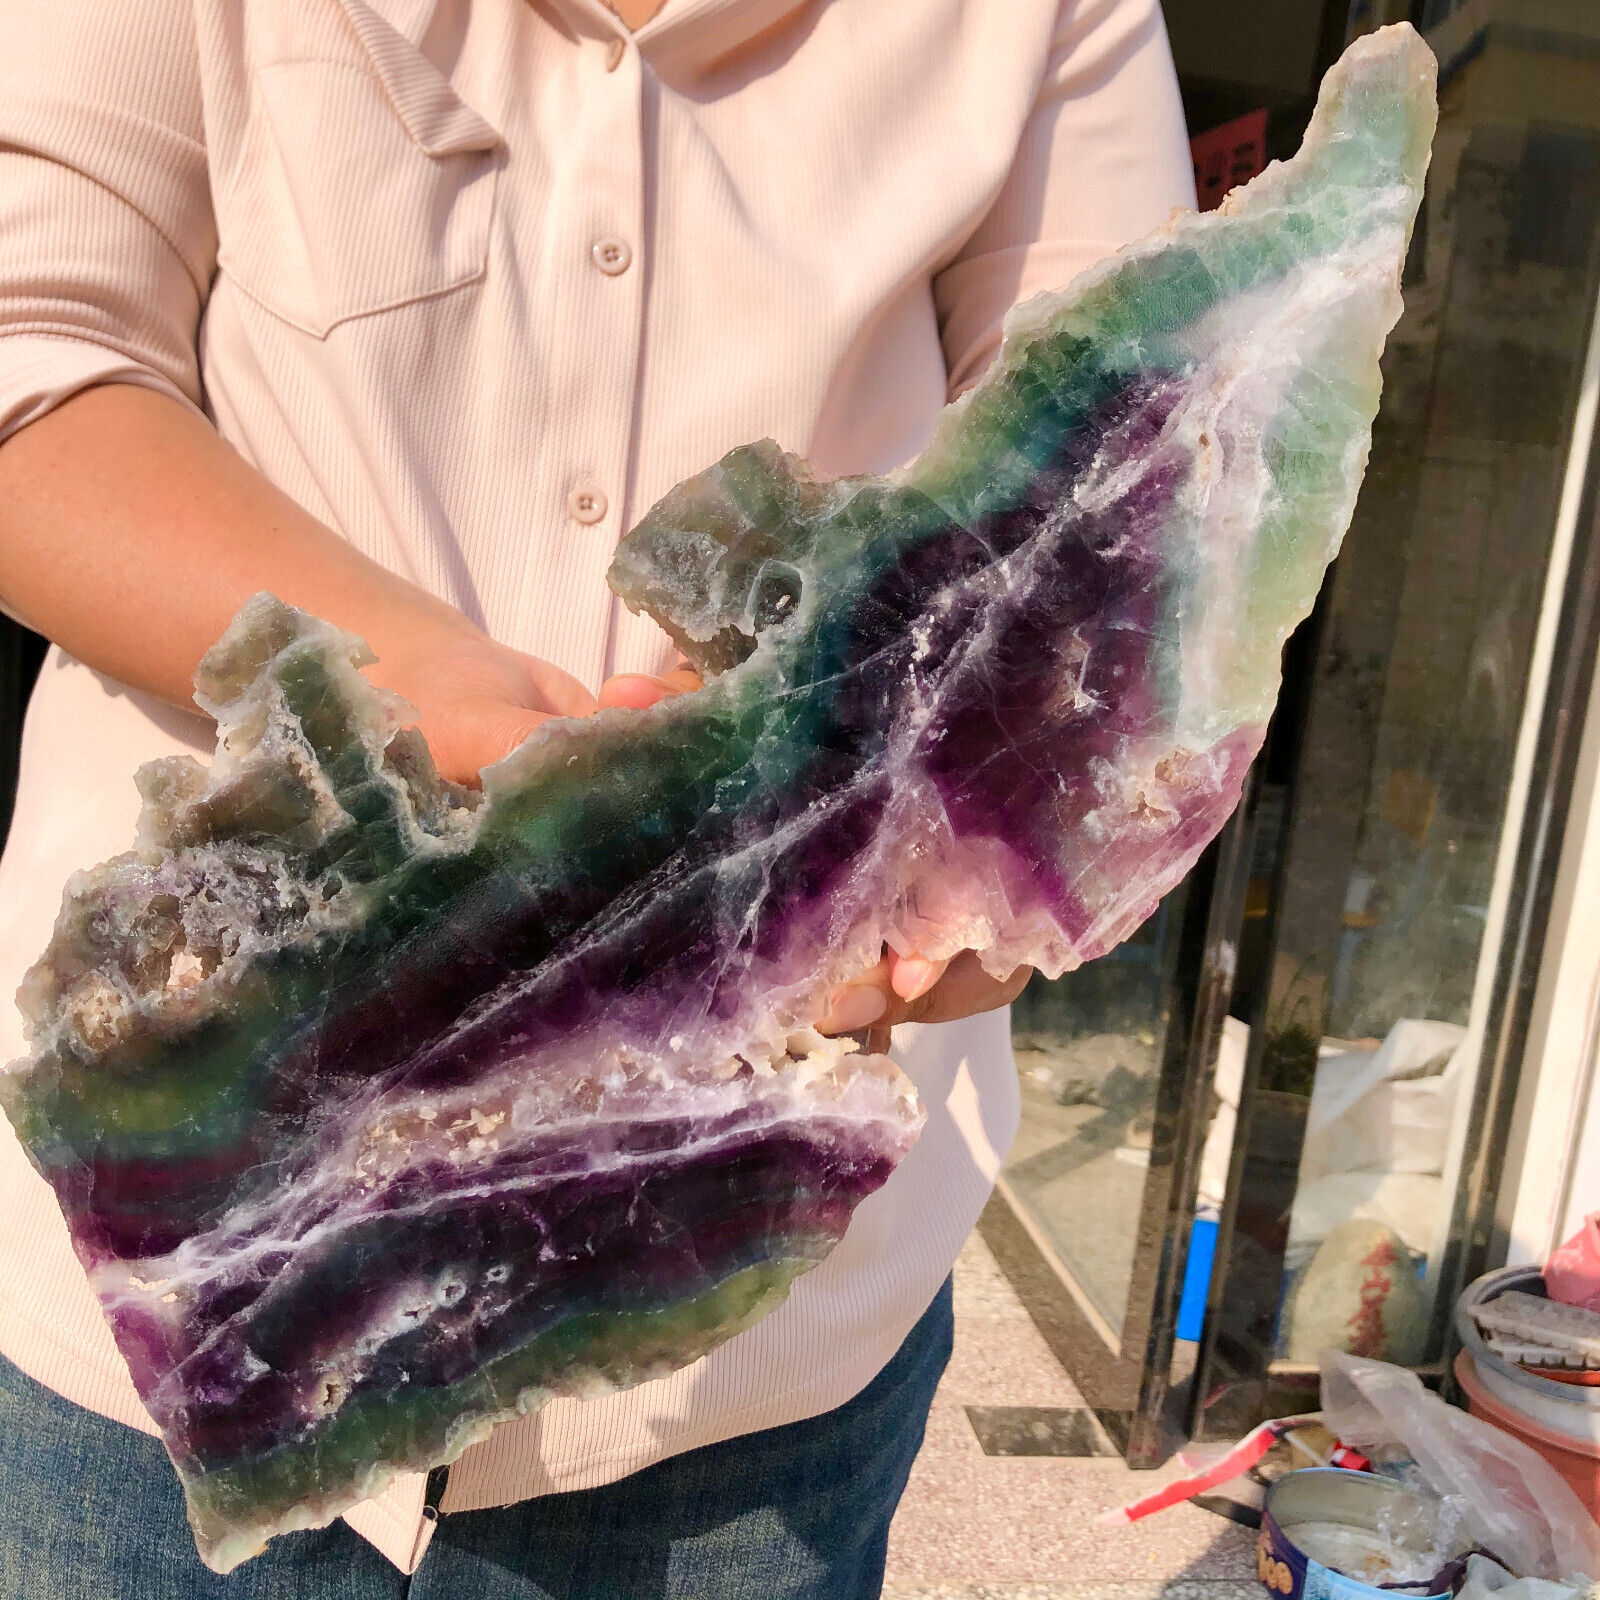 6.95lb  Natural beautiful Rainbow Fluorite Crystal Rough stone specimens cure